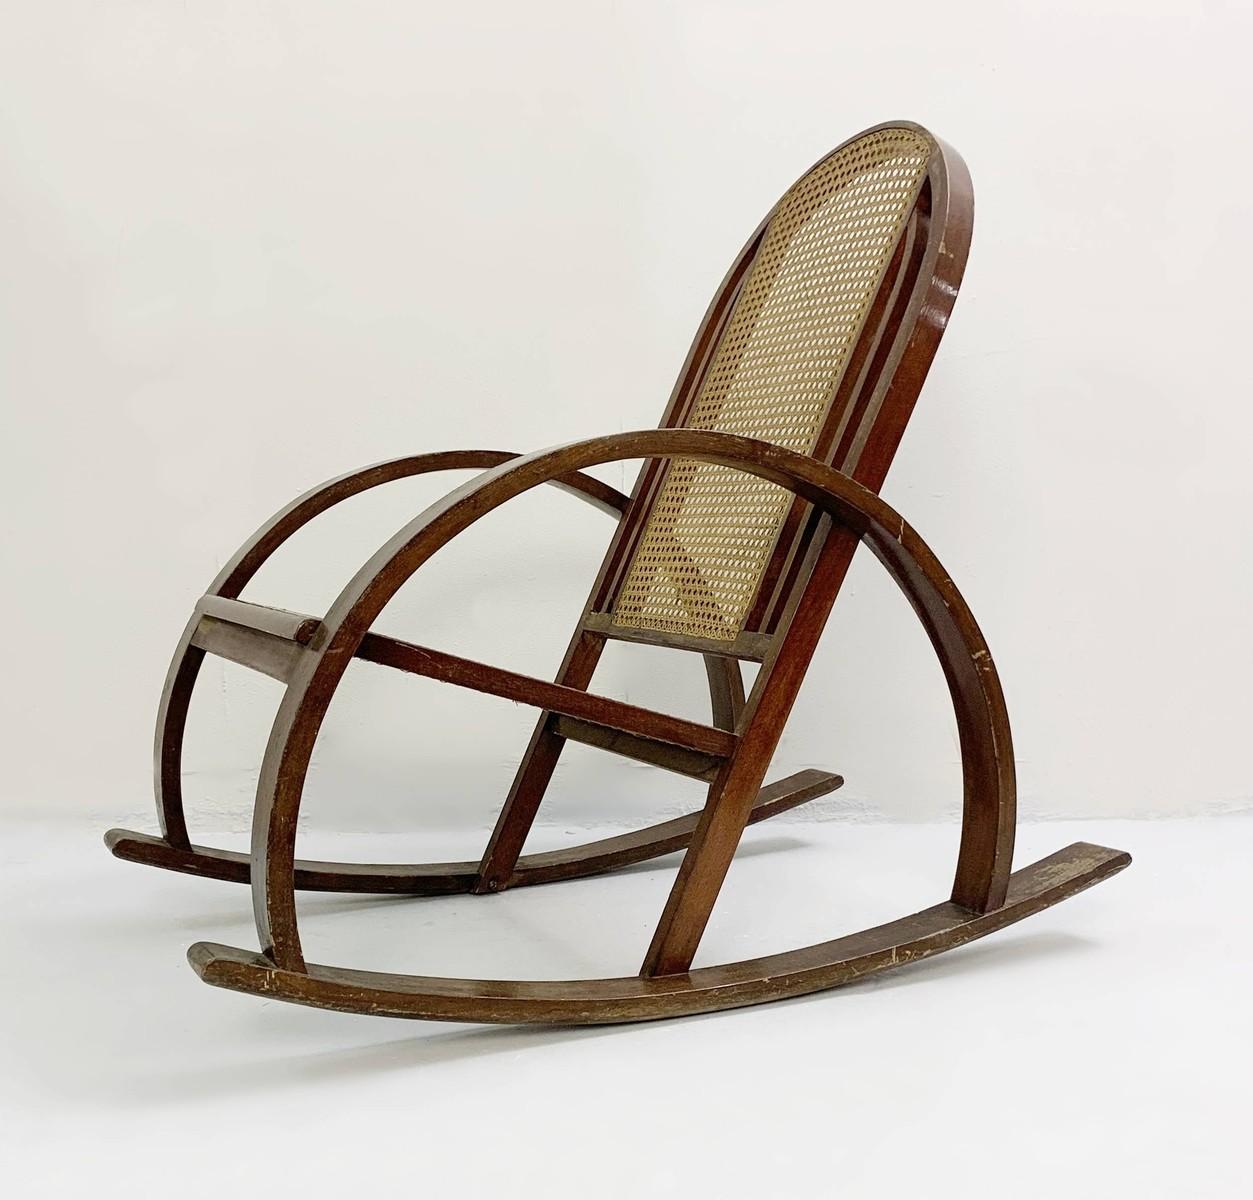 Pair of bentwood rocking chairs with sitting and back in caning.